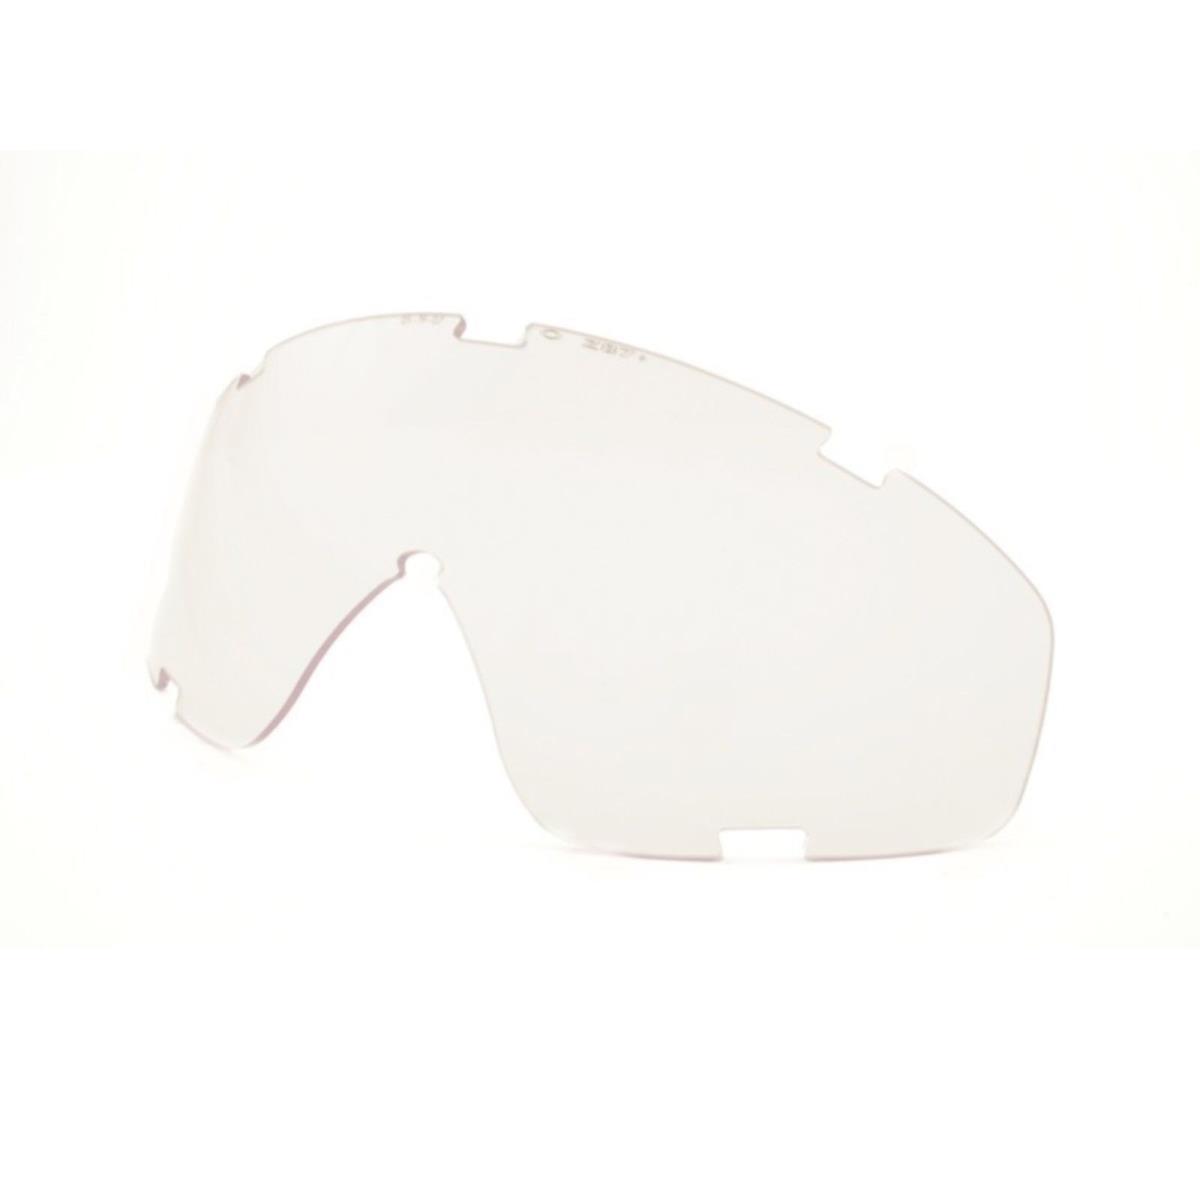 SI Ballistic Goggle Clear Replacement Lens For Oakley Goggles Qty of 5